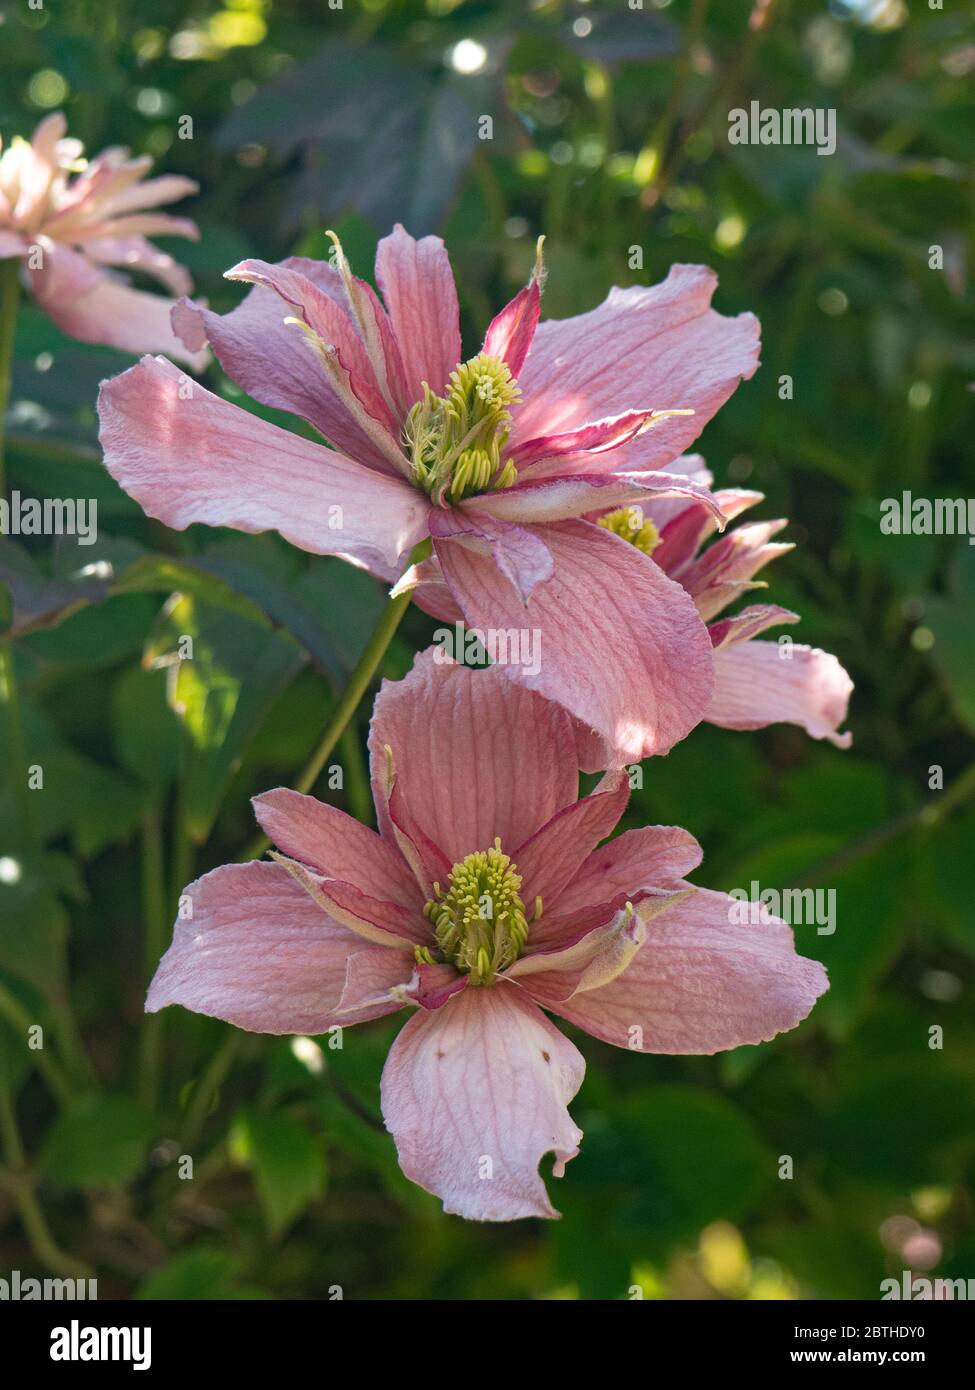 A pair of the double pink flowers of Clematis montana Marjorie Stock Photo